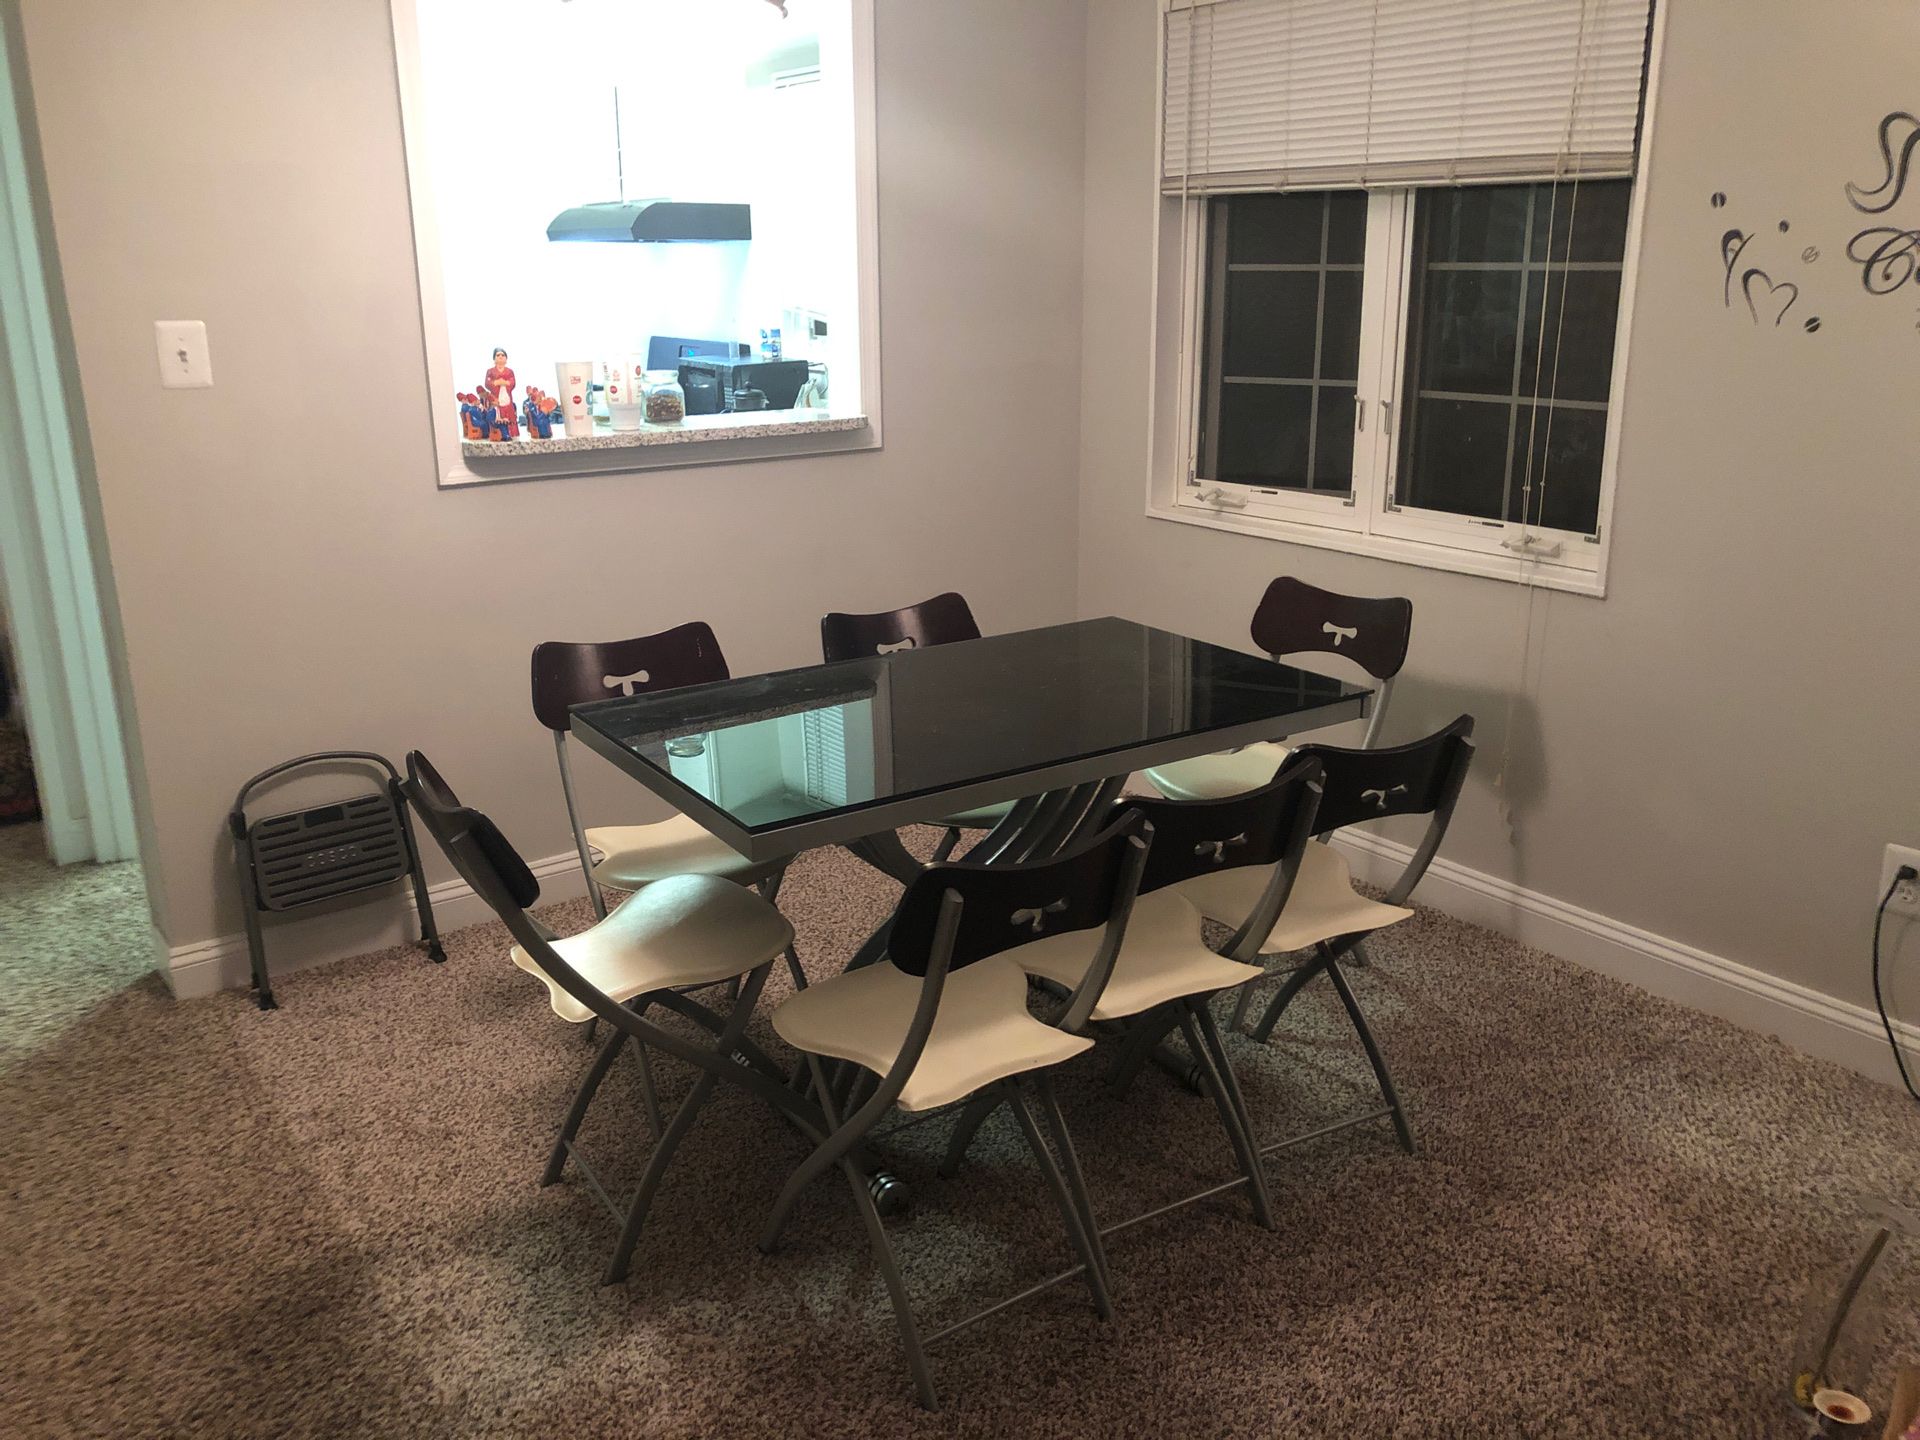 FULL GLASS DINING TABLE FOR 25$!